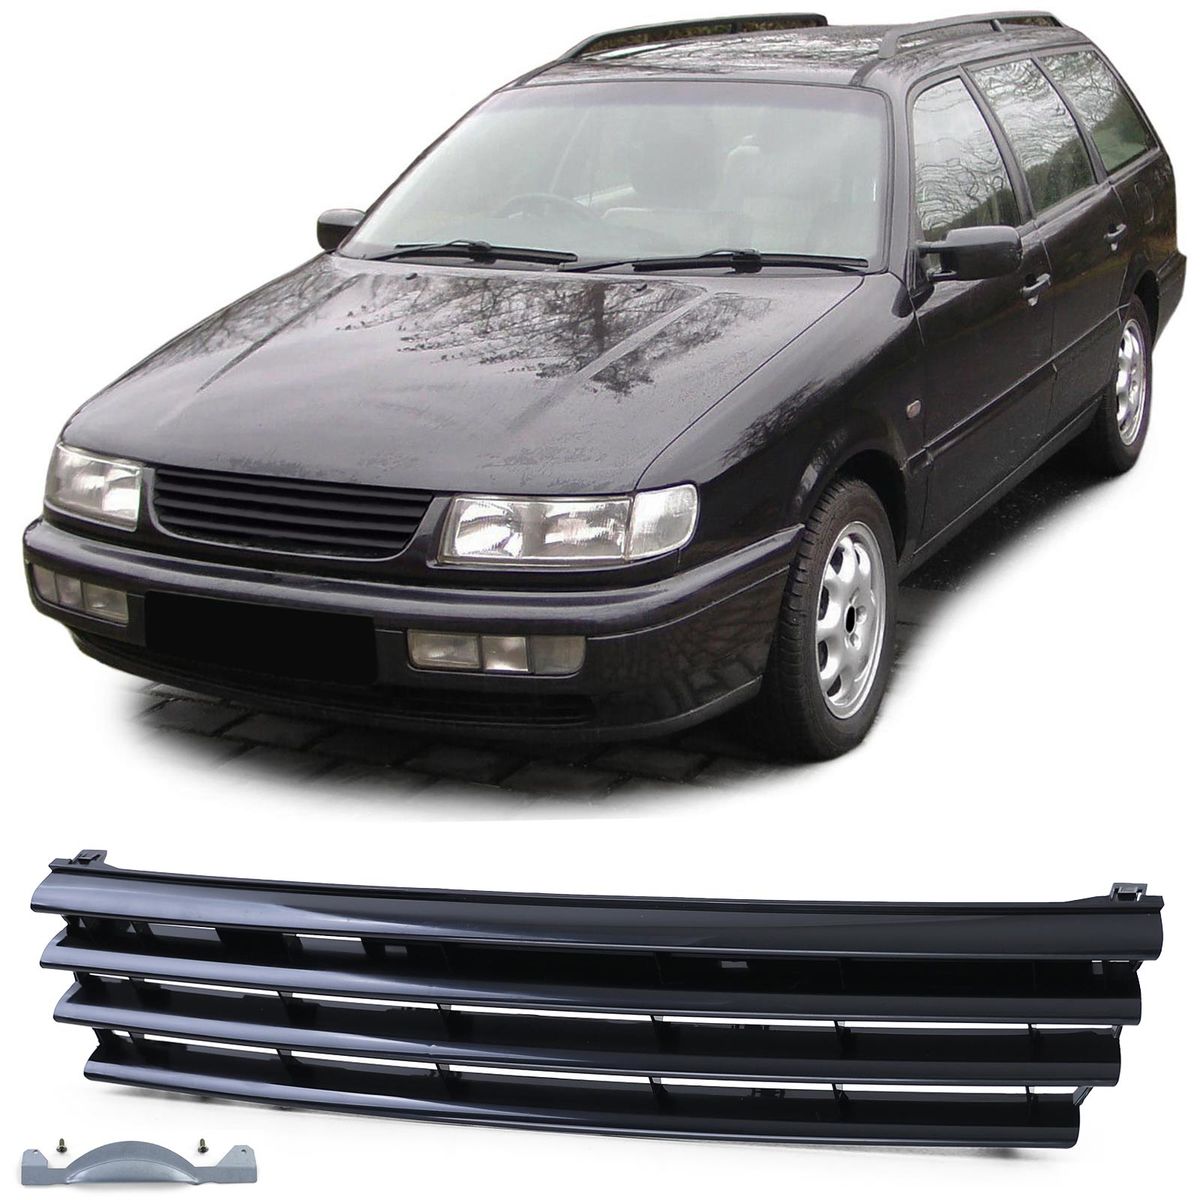 Front Grill Without emblem / badgeless grill for VW Passat B4 35i 1993-1997